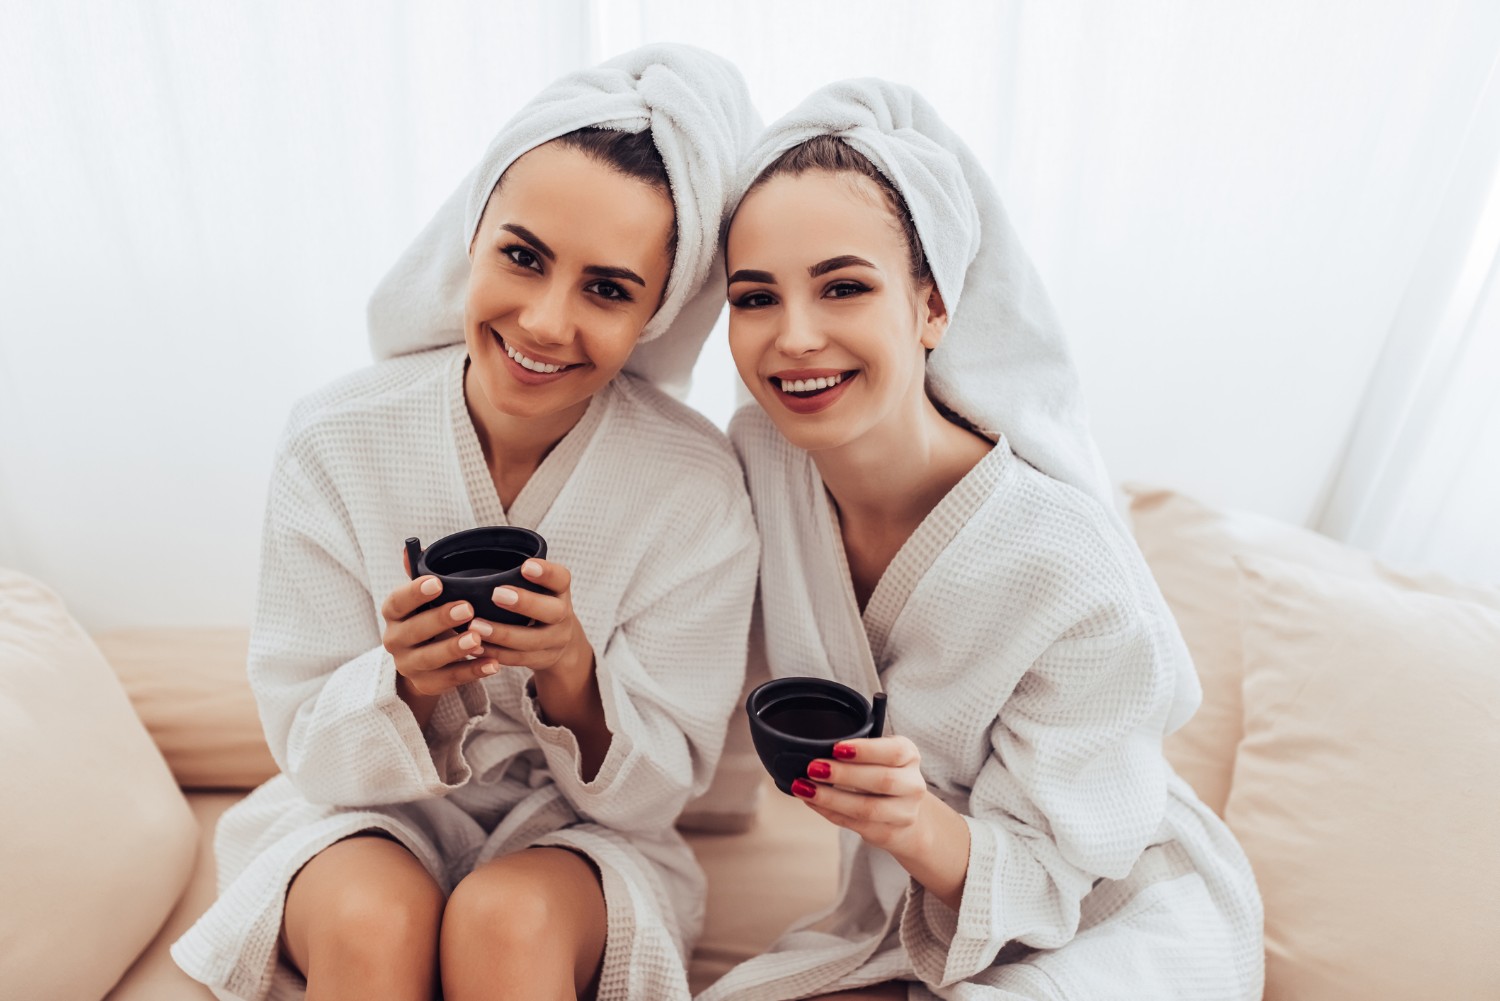 Two women in bathrobes relaxing at the spa.